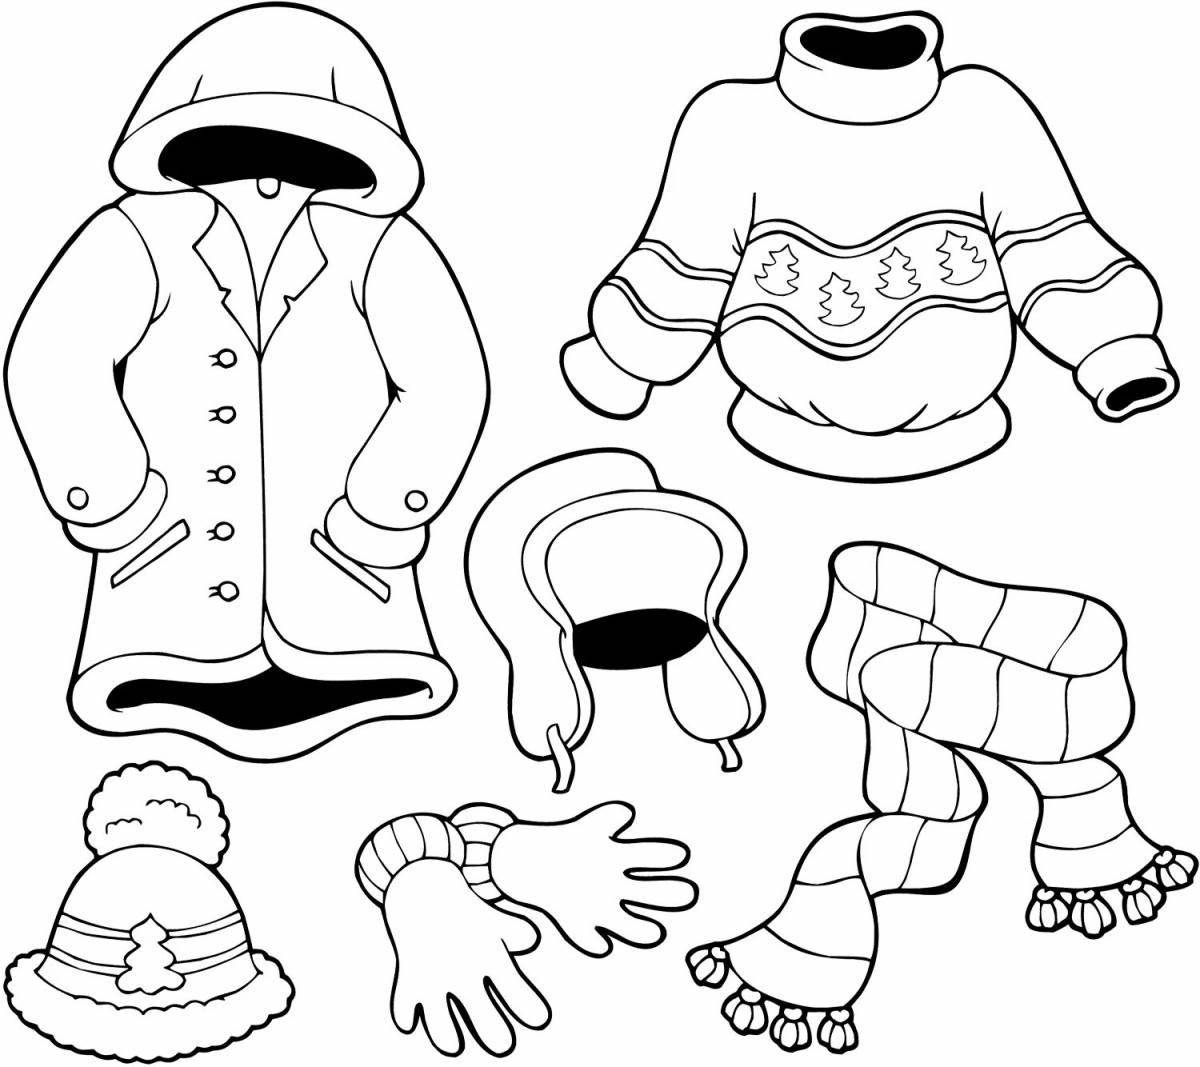 Coloring page fancy home clothes